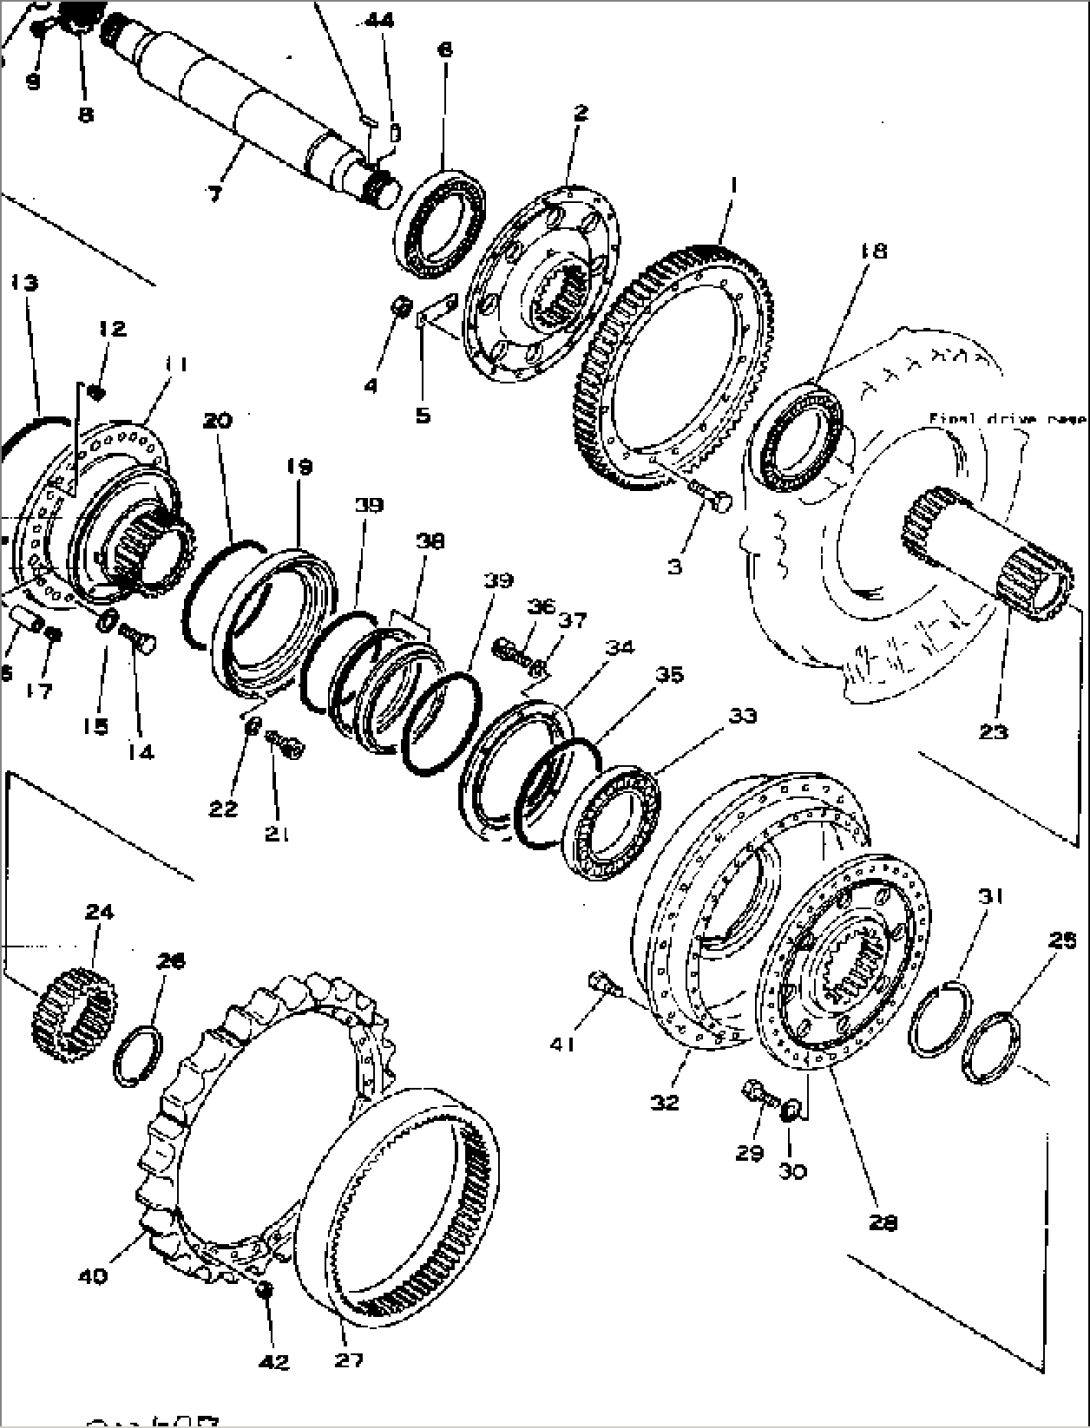 FINAL DRIVE GEAR AND SHAFT (1/2)(#3259-)